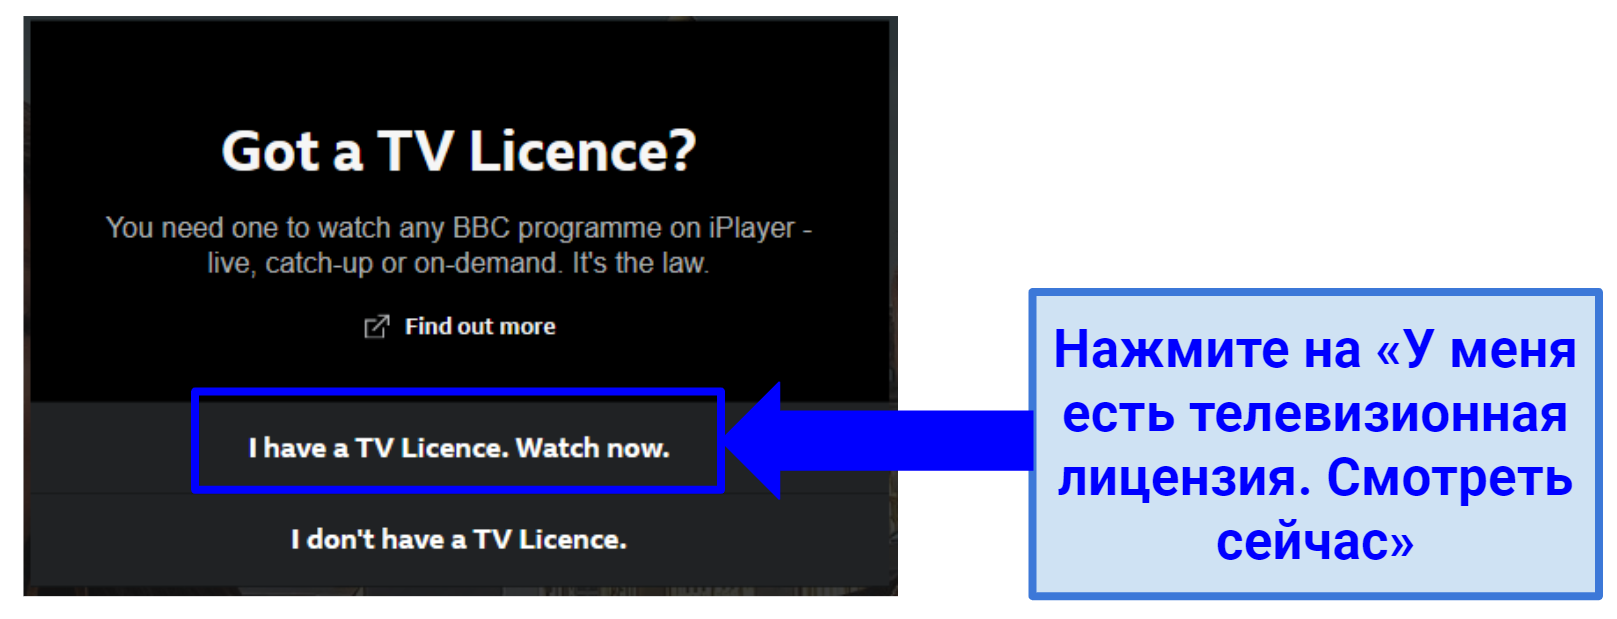 Screenshot showing a BBC iPlayer popup asking users to confirm if they have a TV license after sign up.